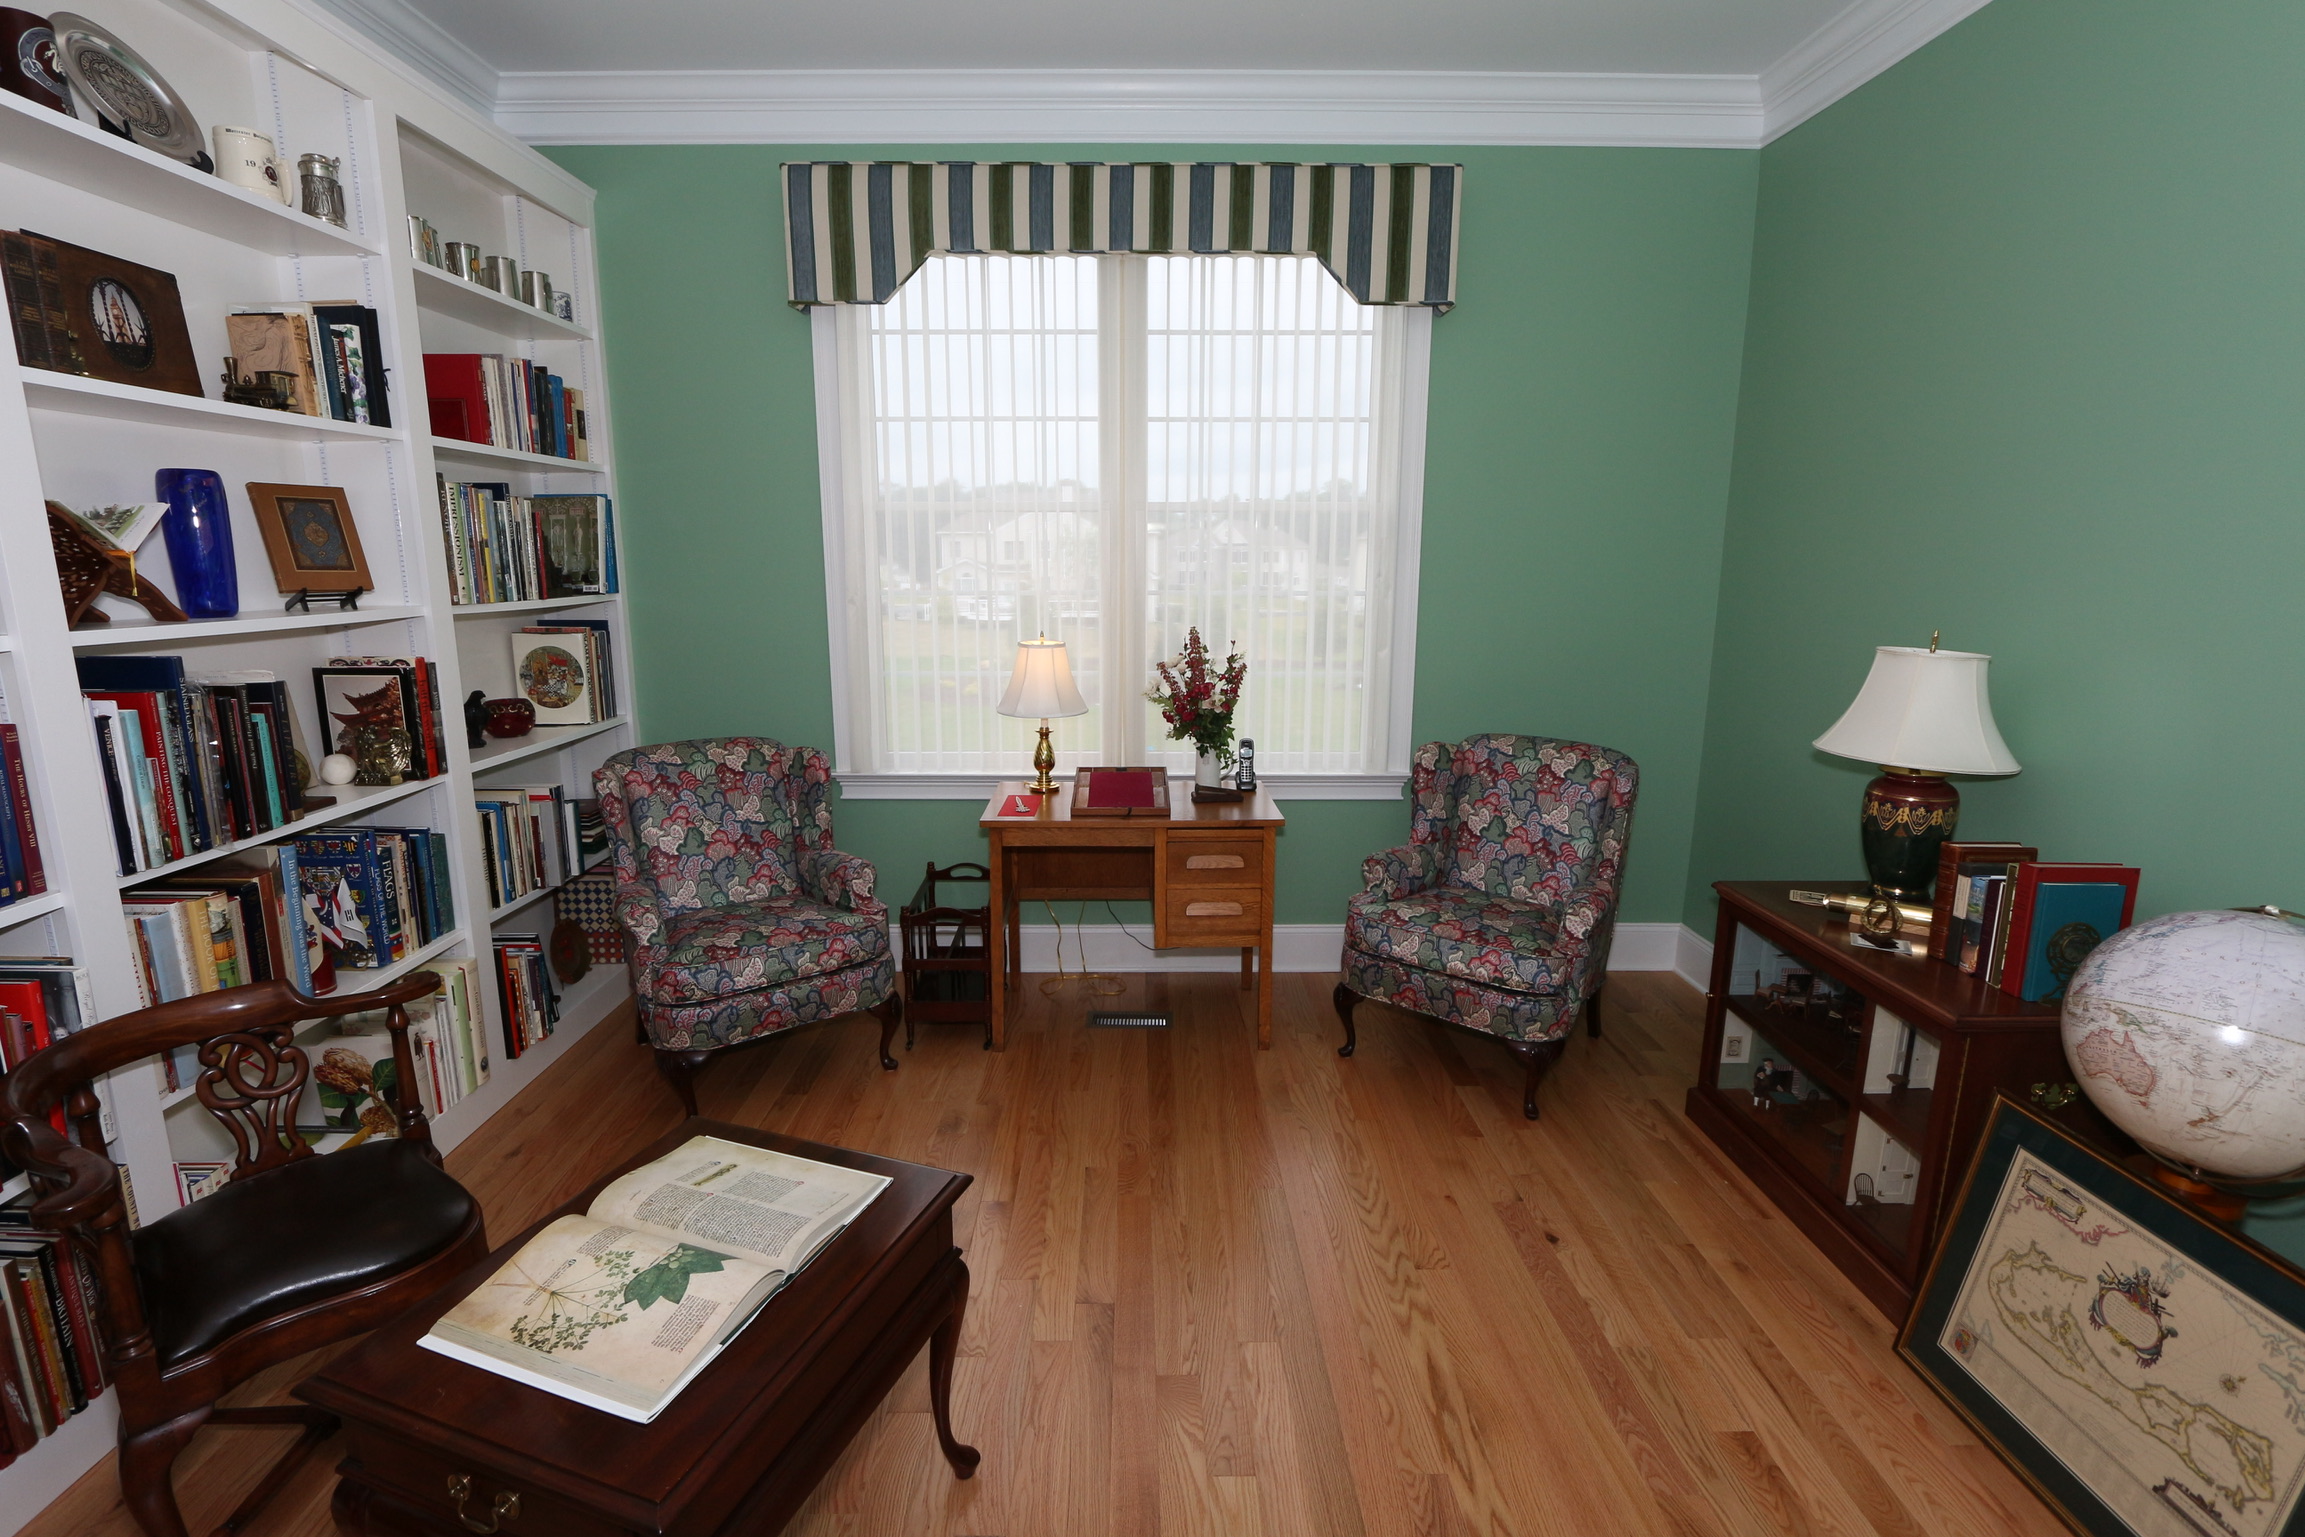 Office Lounge of mixed patterns: green striped cornice and "splotched" chairs